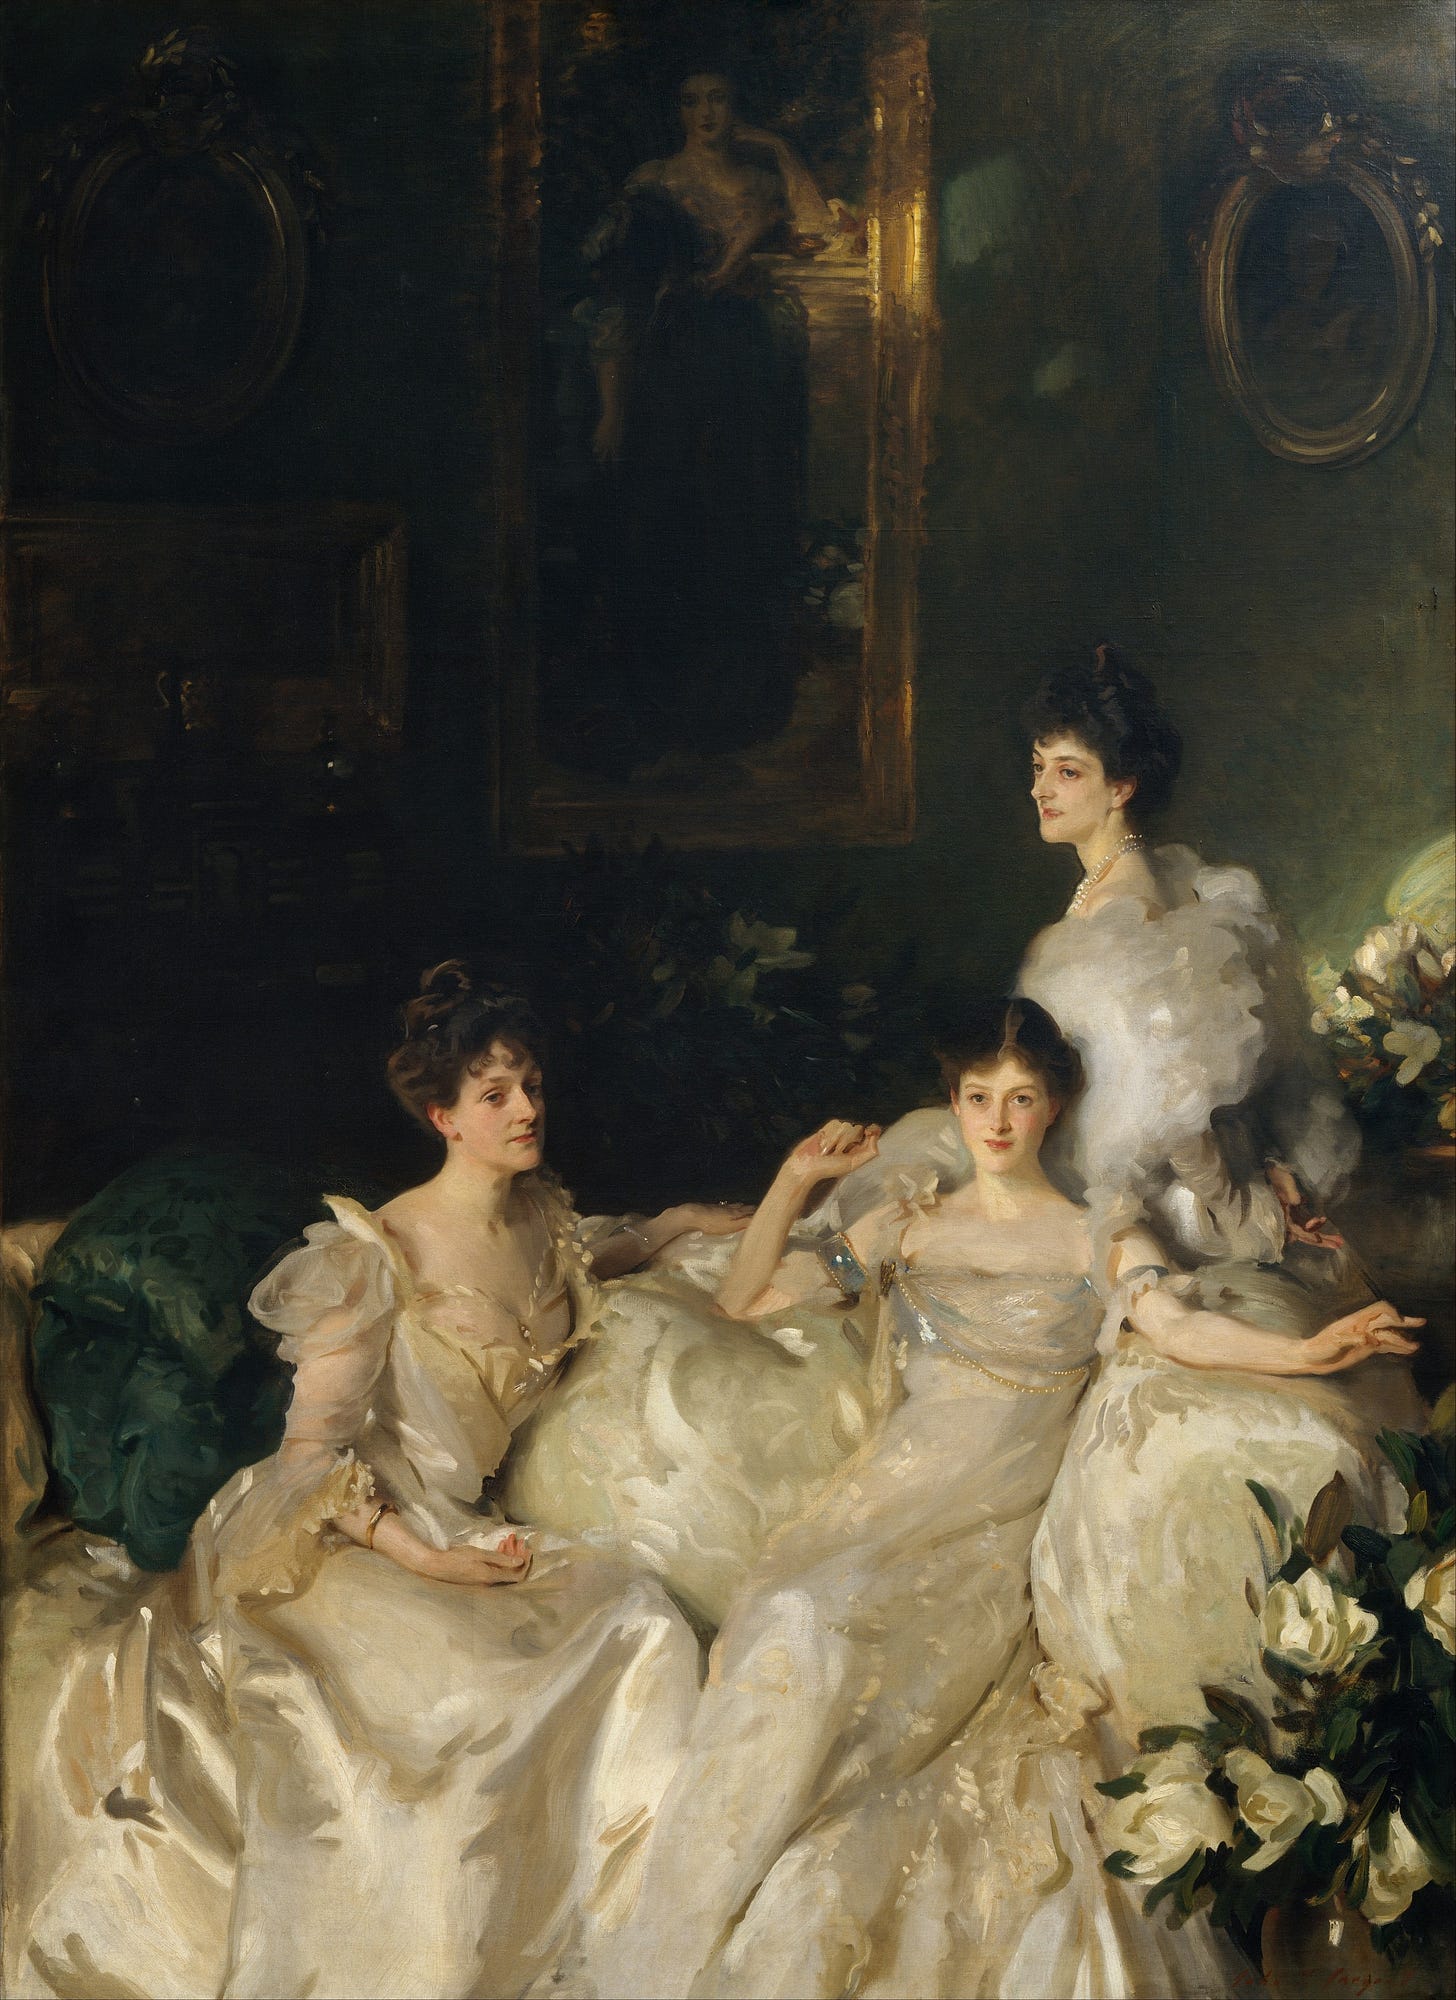 The Wyndham Sisters: Lady Elcho, Mrs. Adeane, and Mrs. Tennant - Wikipedia